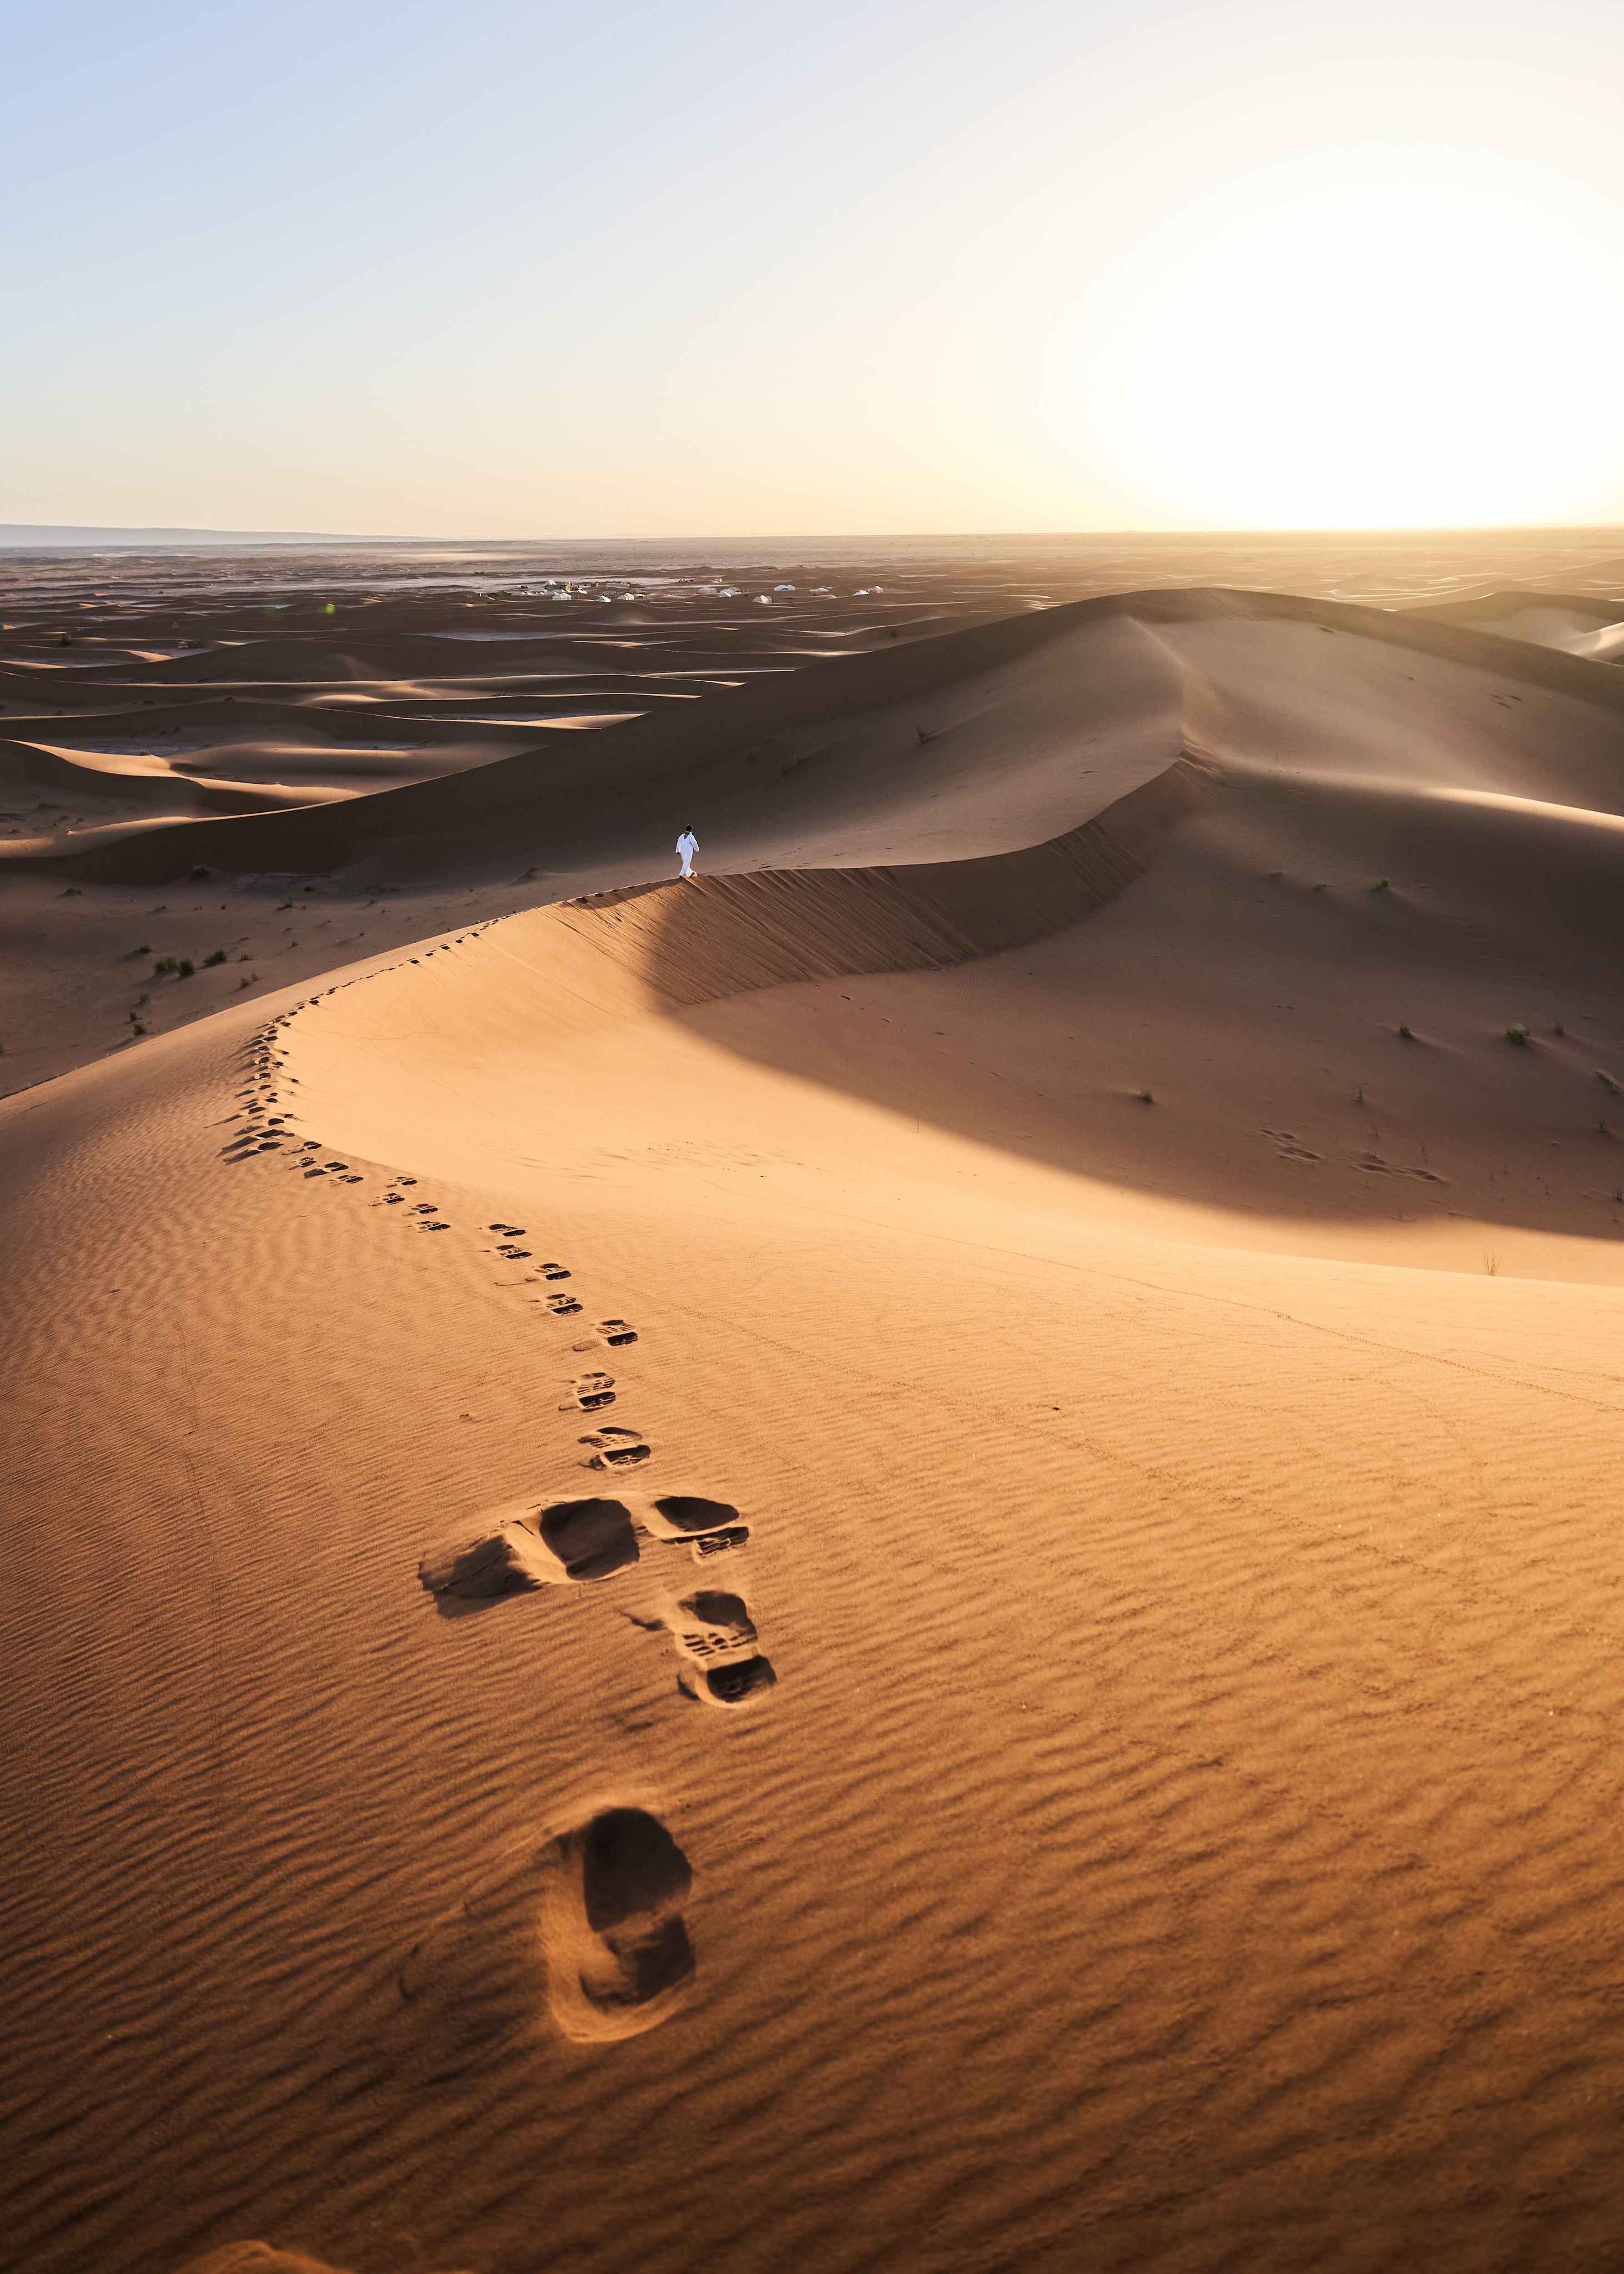 Desert with footprints in the sand